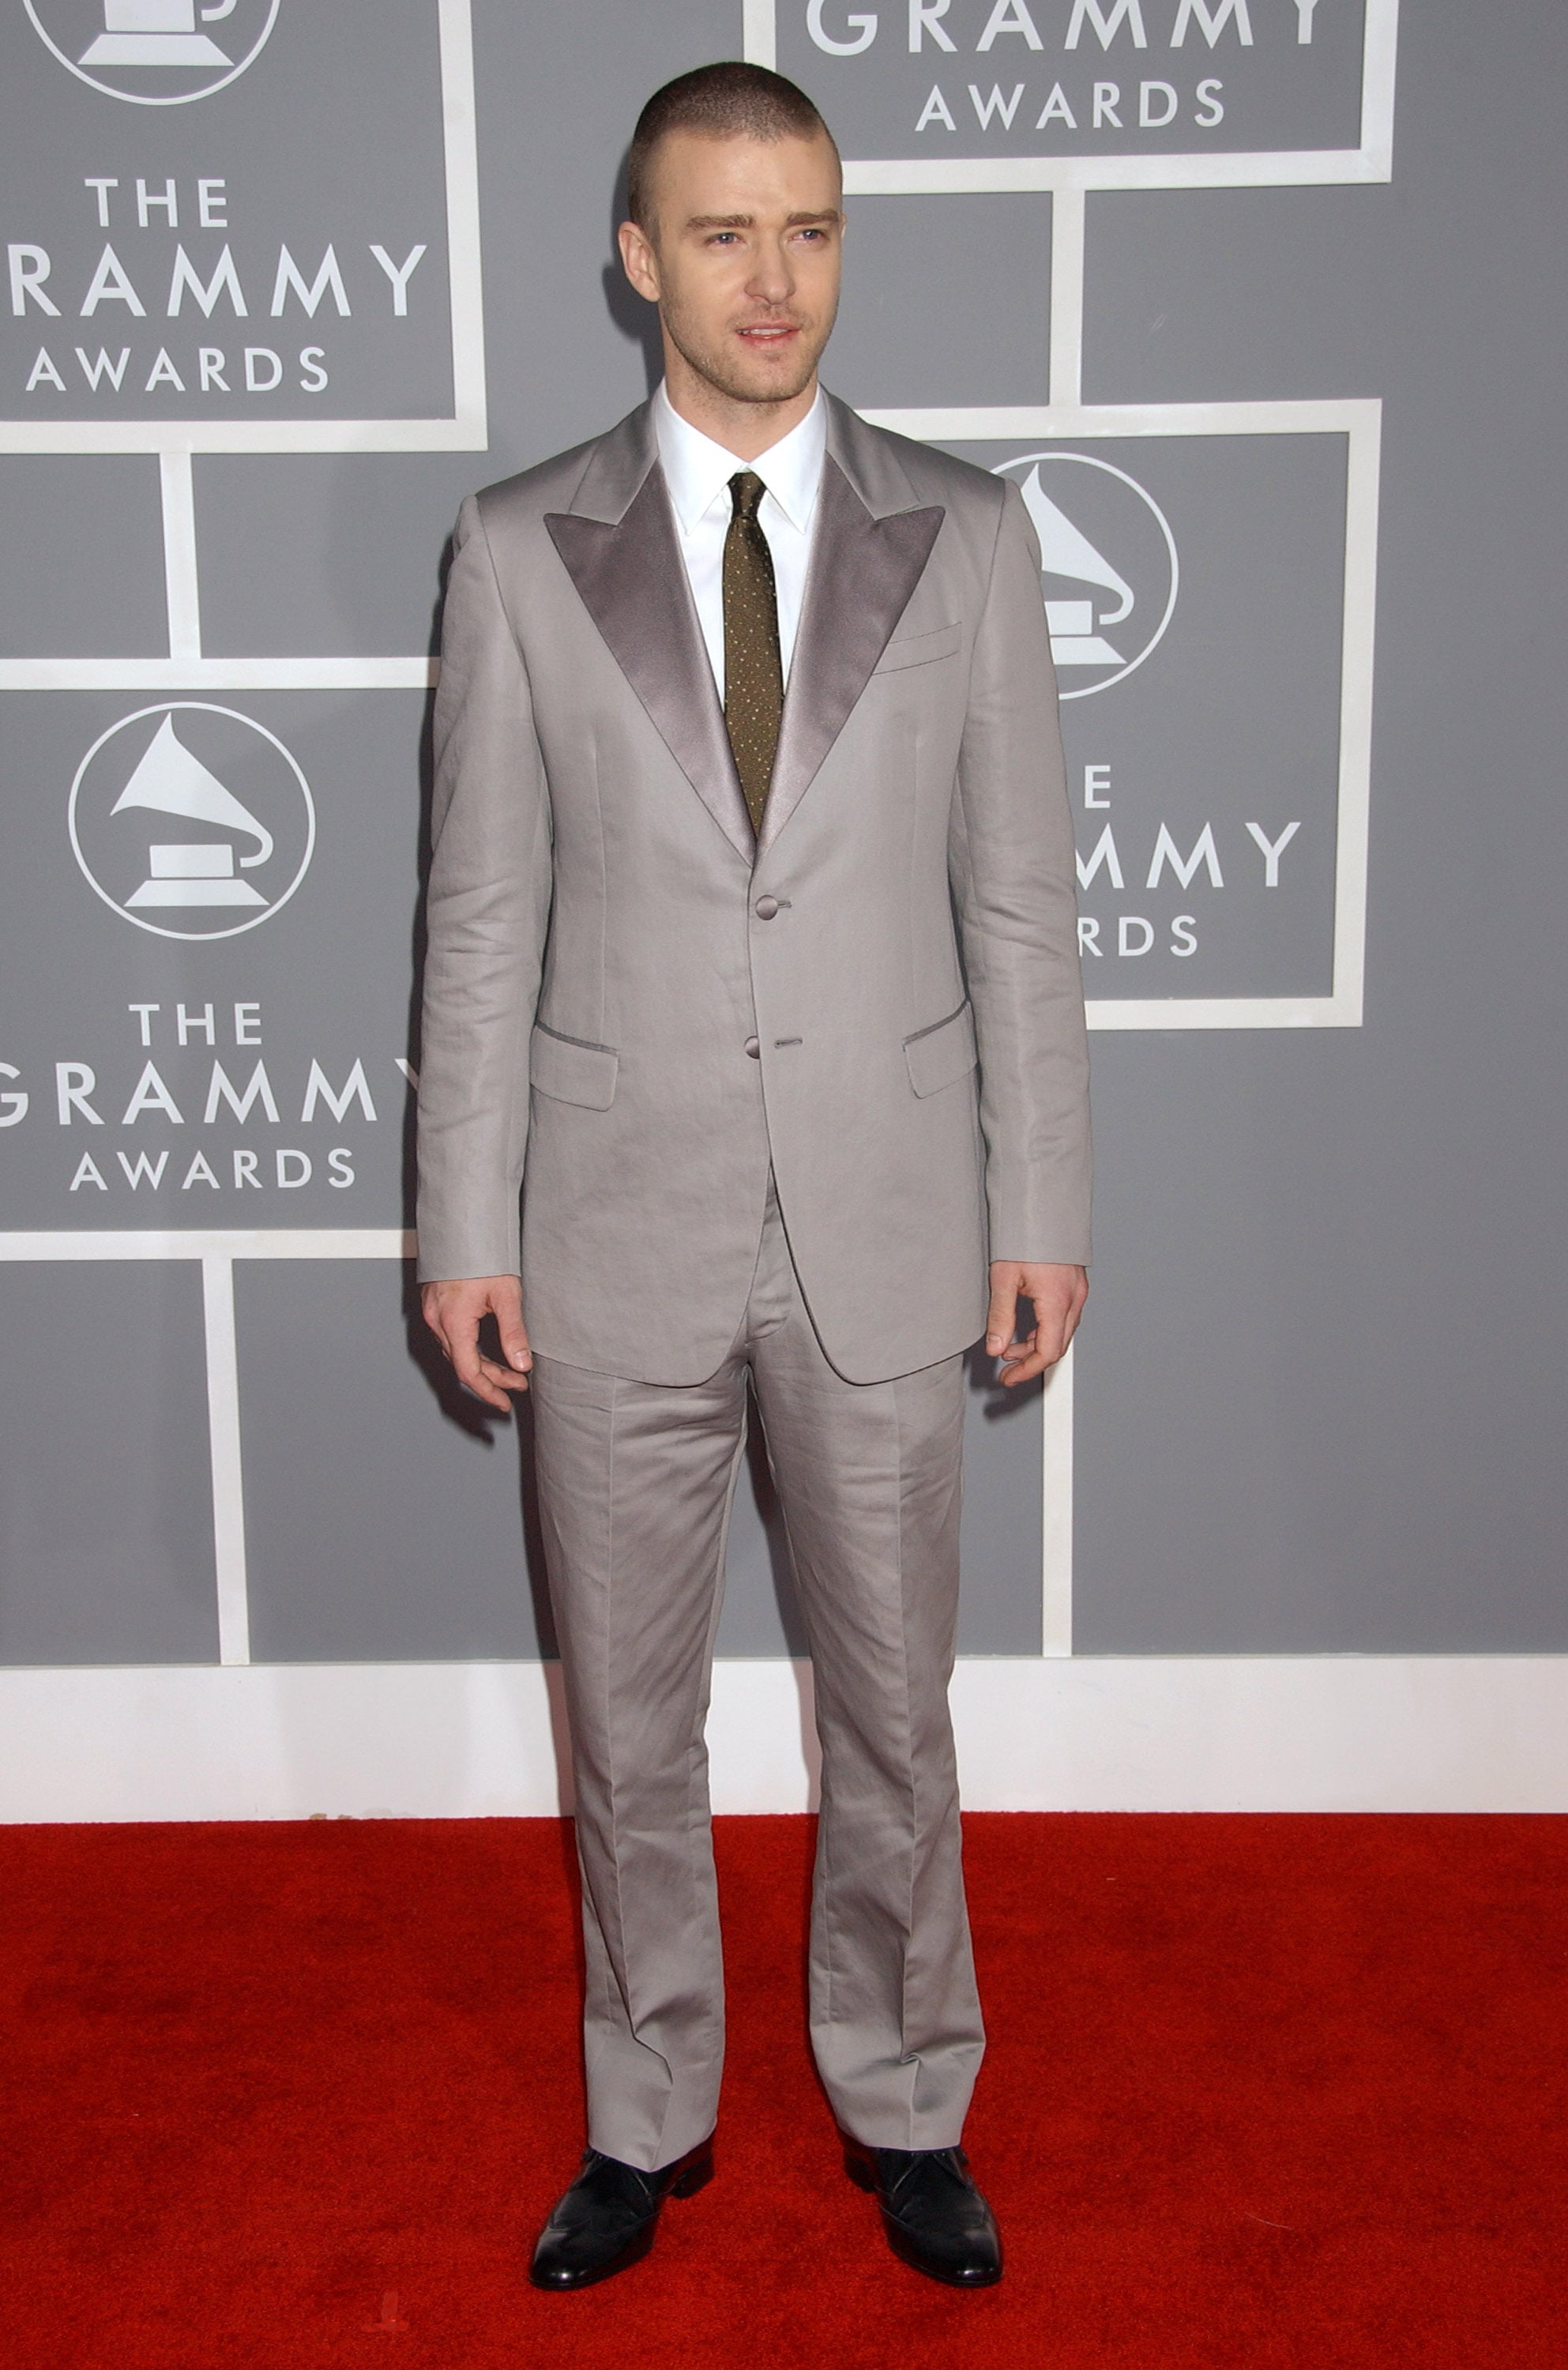 Justin hit the red carpet in a silvery-gray and tie at the | Wonder Justin Timberlake Is All About the Suit and Tie | POPSUGAR Fashion Photo 10